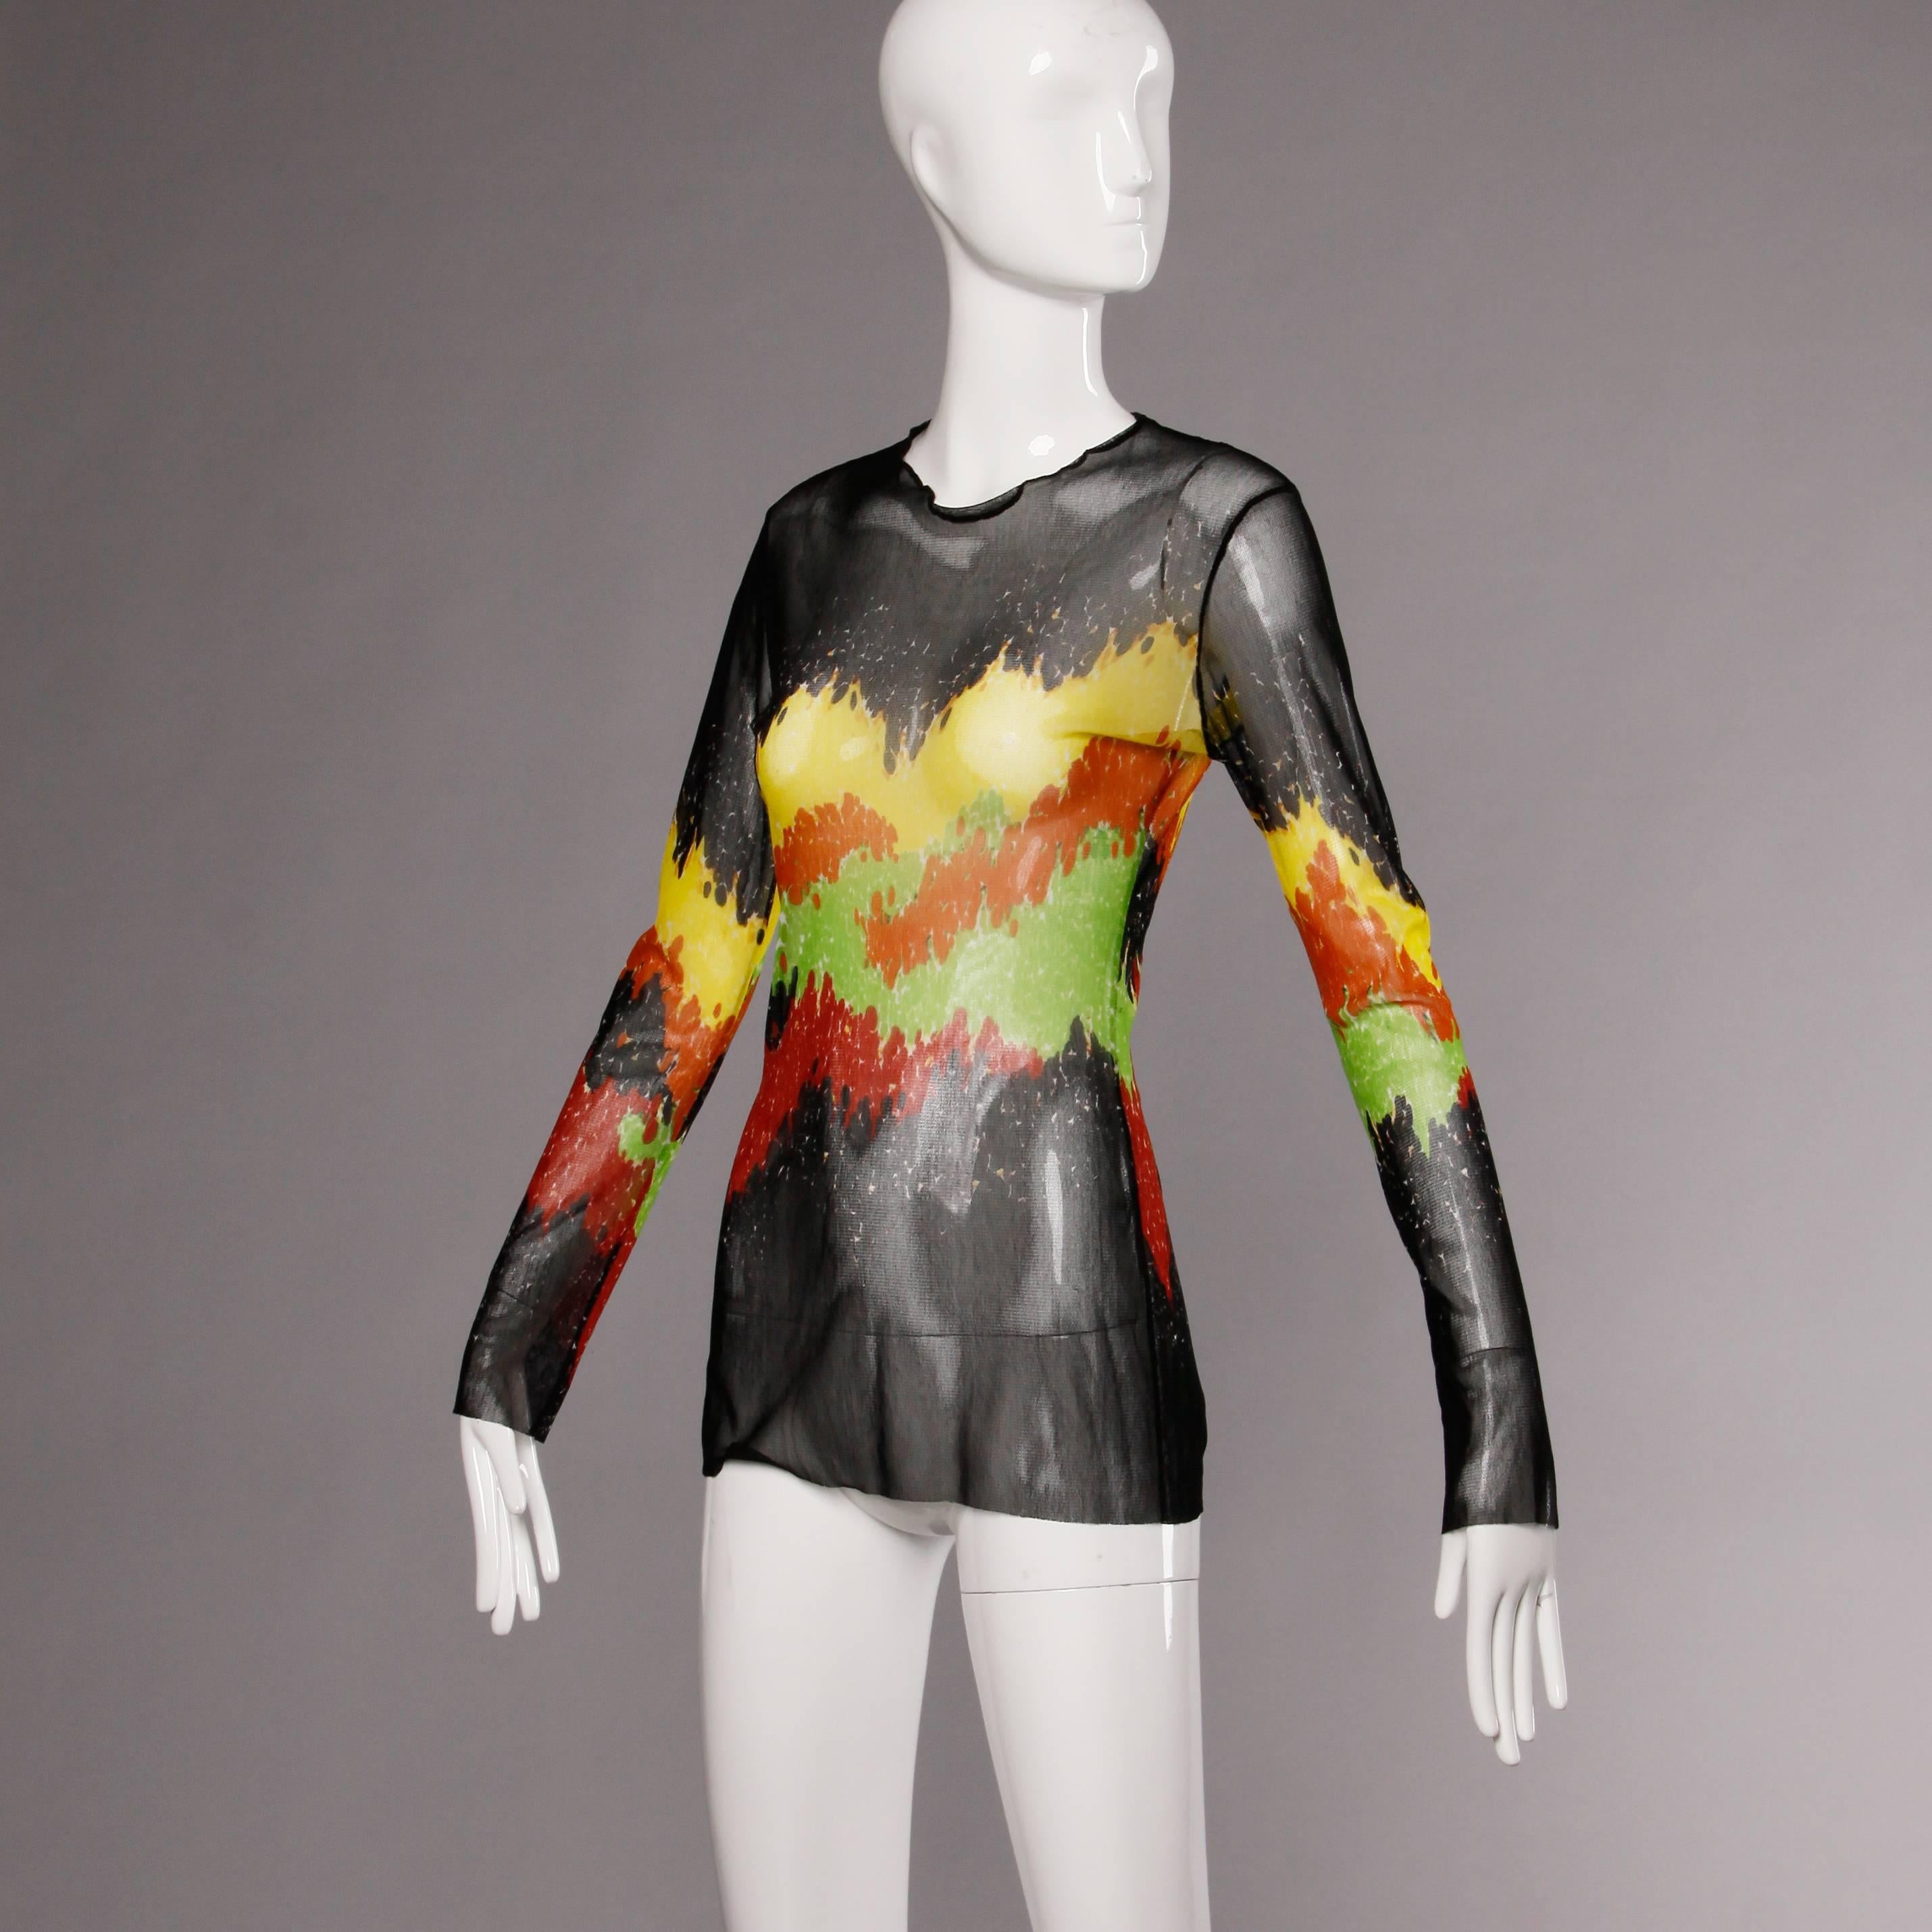 Sheer mesh Jean Paul Gaultier Maille long sleeve top in a multicolor abstract print. The marked size is a US large and the top fits true to size. The measurements are as follows:

Bust: 34-40